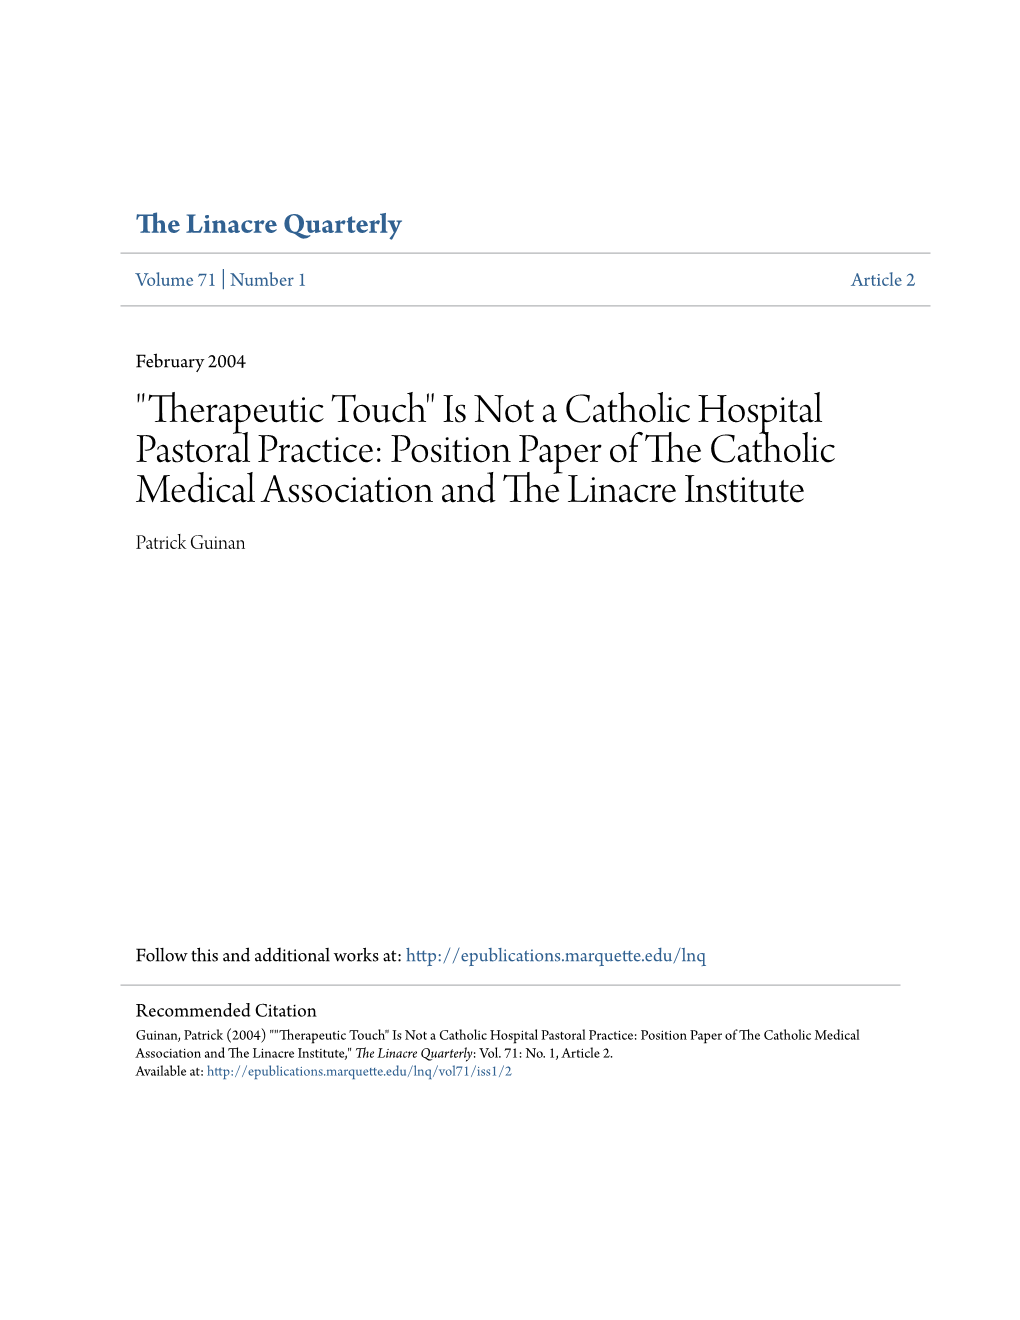 Therapeutic Touch" Is Not a Catholic Hospital Pastoral Practice: Position Paper of the Ac Tholic Medical Association and the Linacre Institute Patrick Guinan